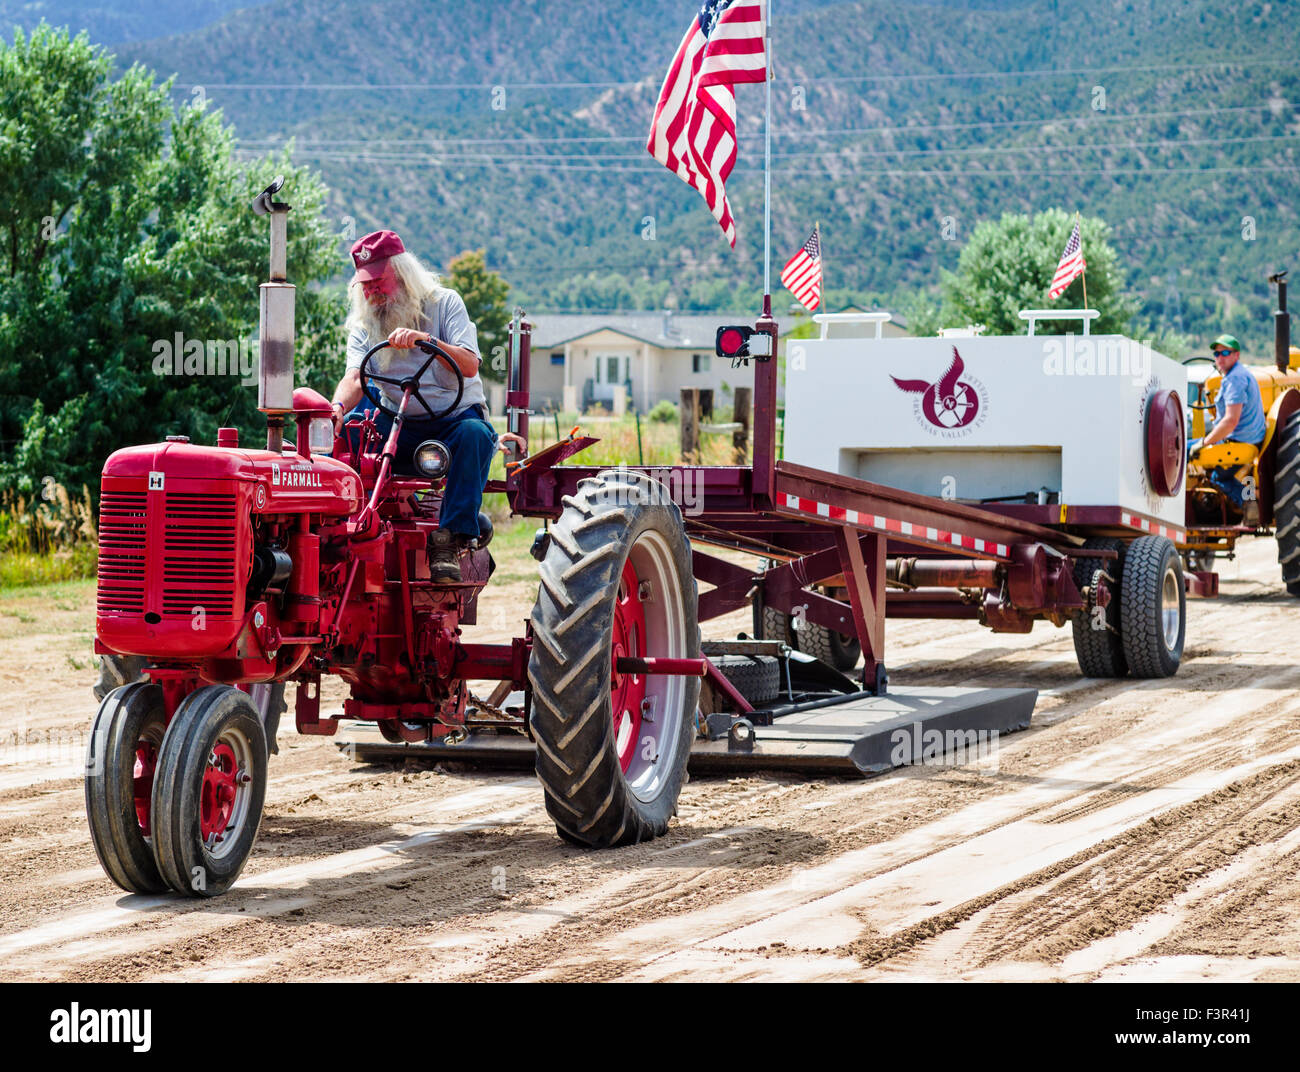 Rancher driving antique tractor, Antique Tractor Pull Event, Chaffee County Fair & Rodeo, Salida, Colorado, USA Stock Photo